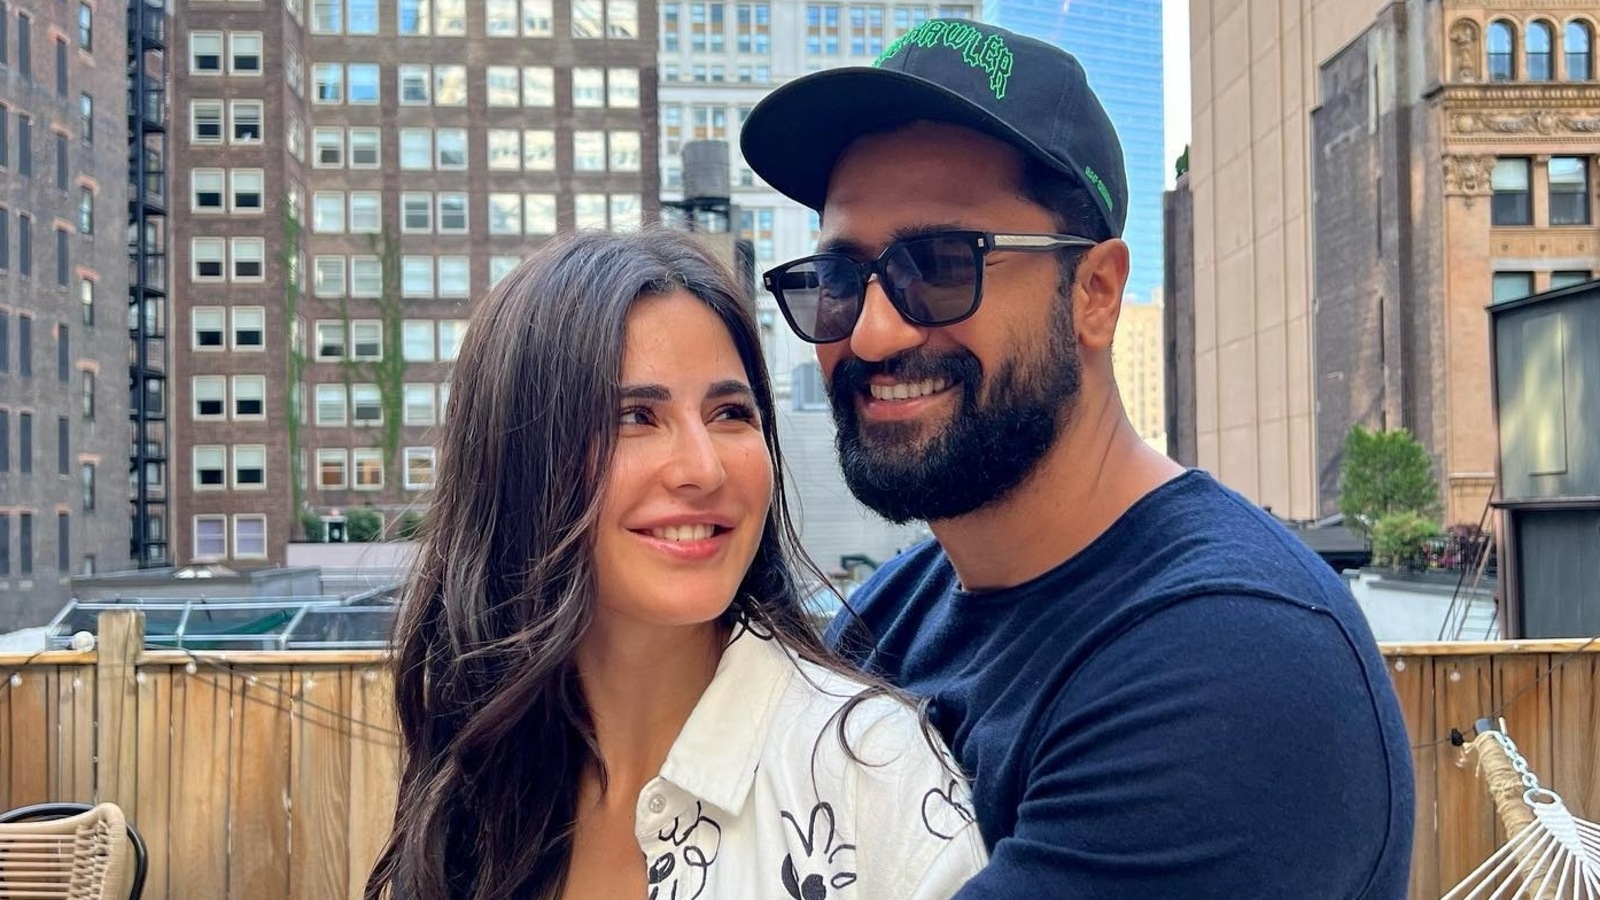 Katrina Kaif recalls she said ‘who is this guy?’ when she saw Vicky Kaushal for the first time in Manmarziyaan promo